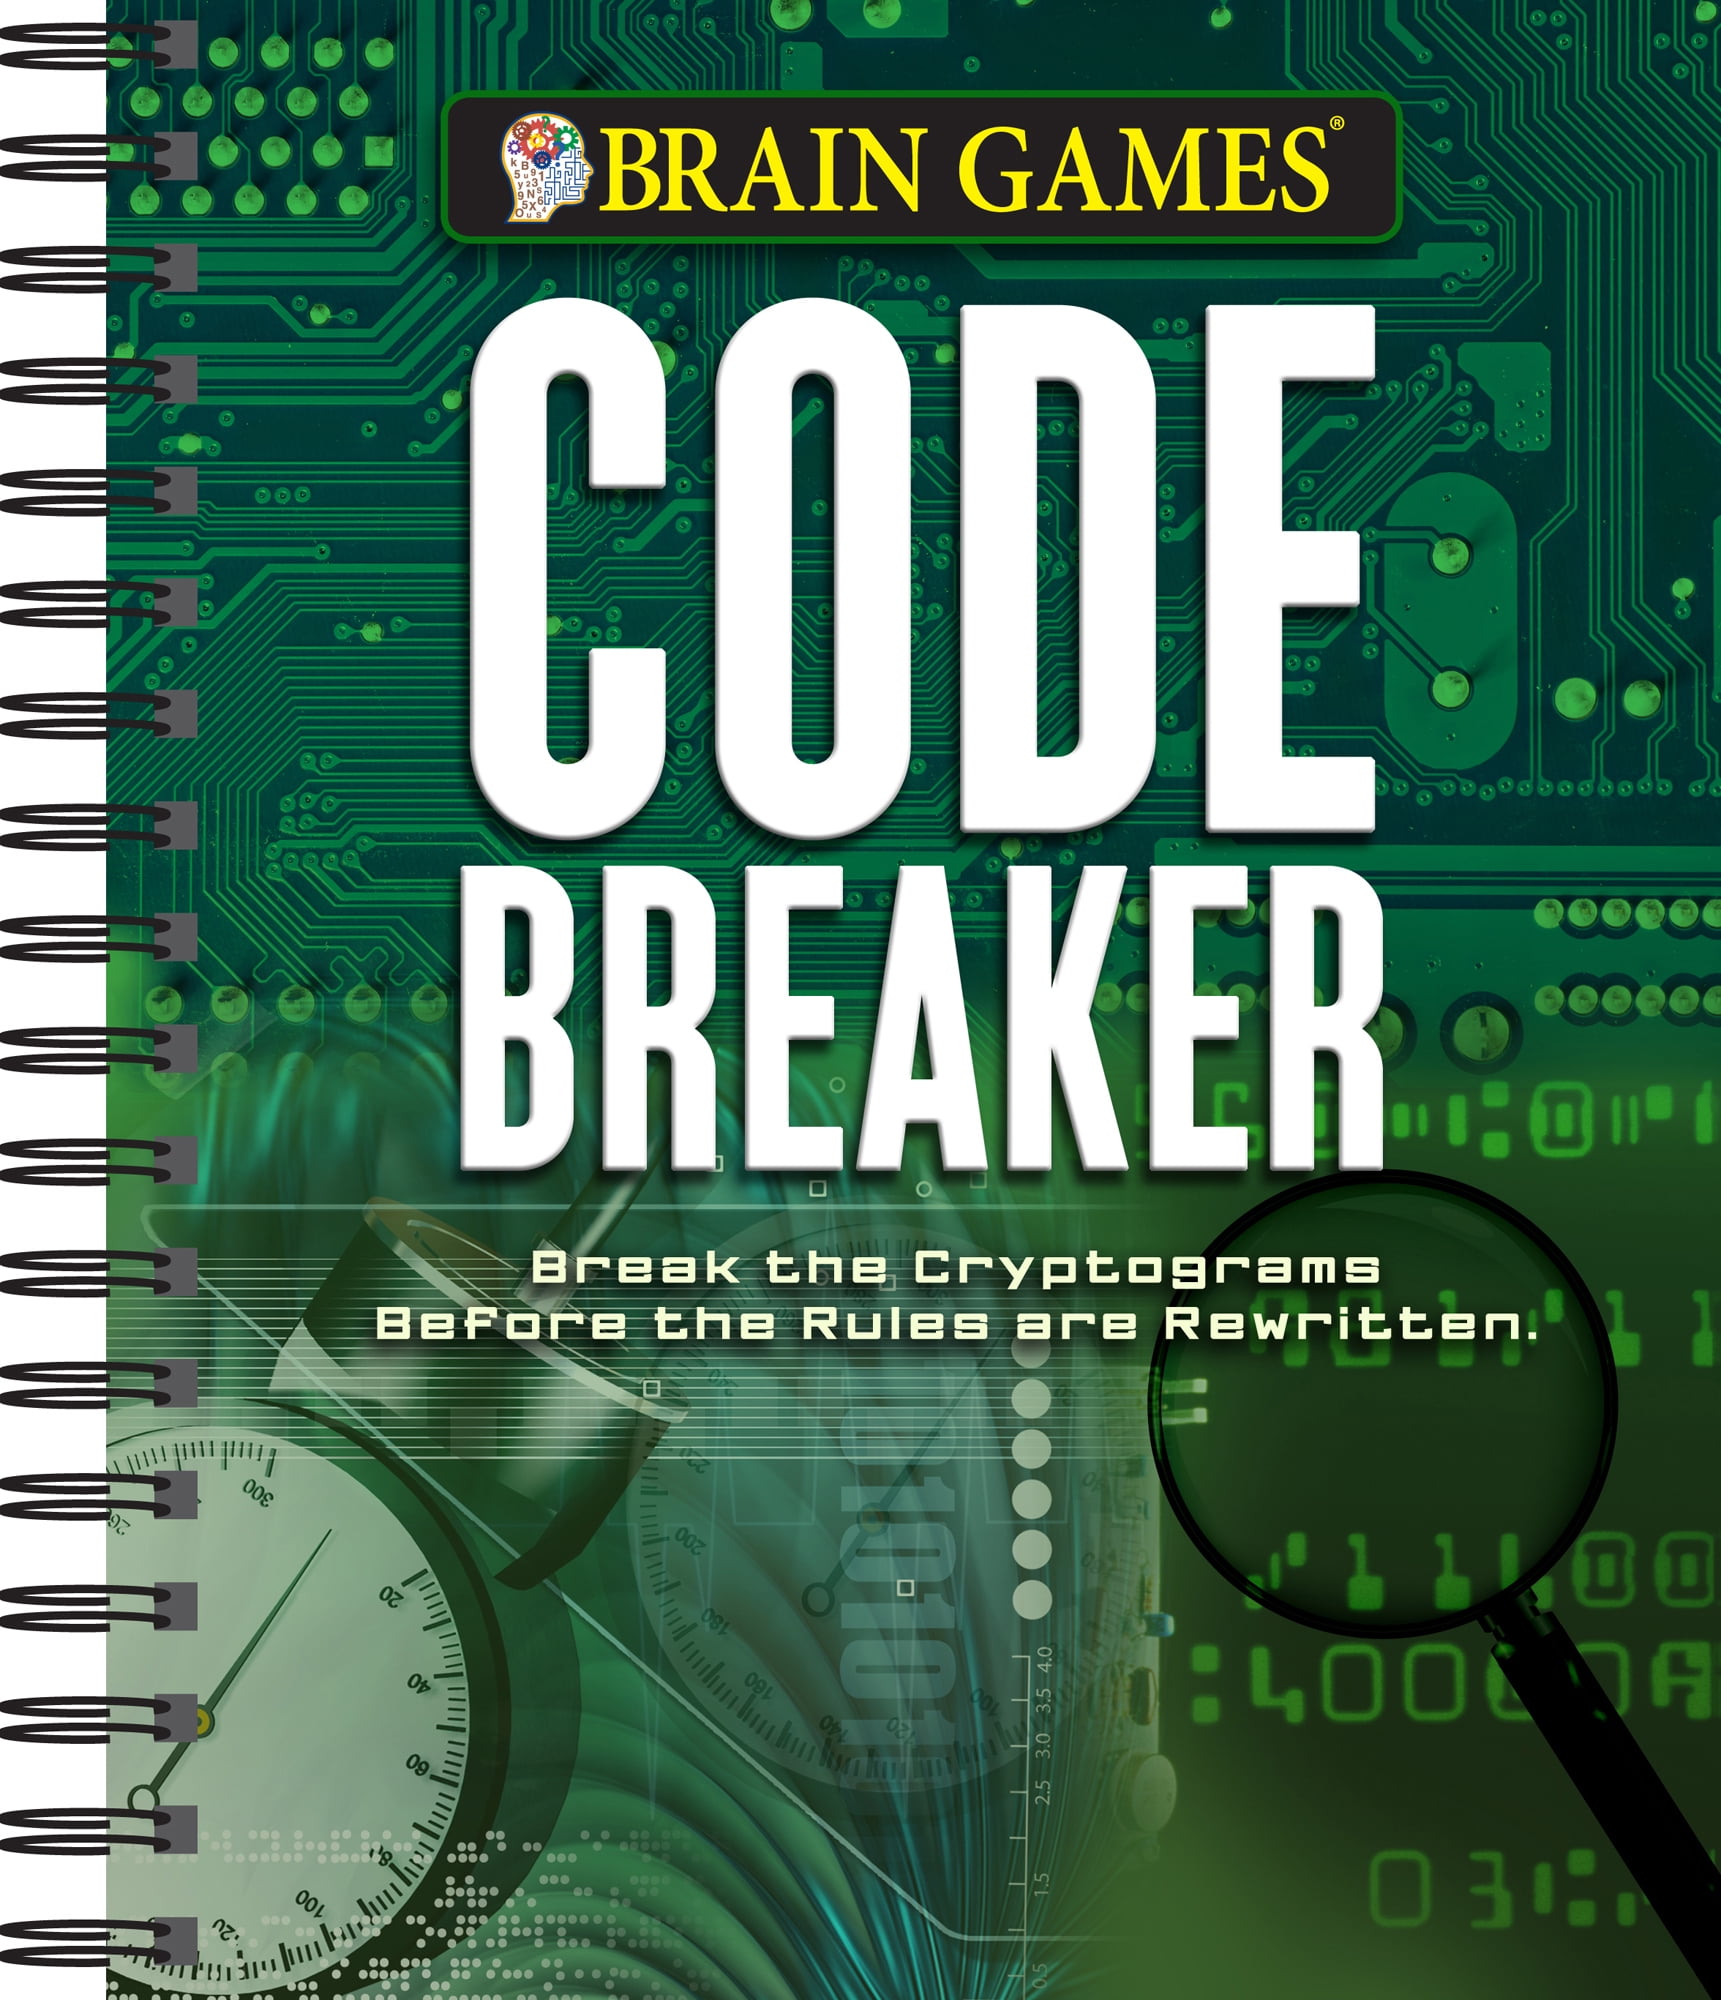 Digital Code Breakers Riddles FREEBIE for Teletherapy by The OT Butterfly